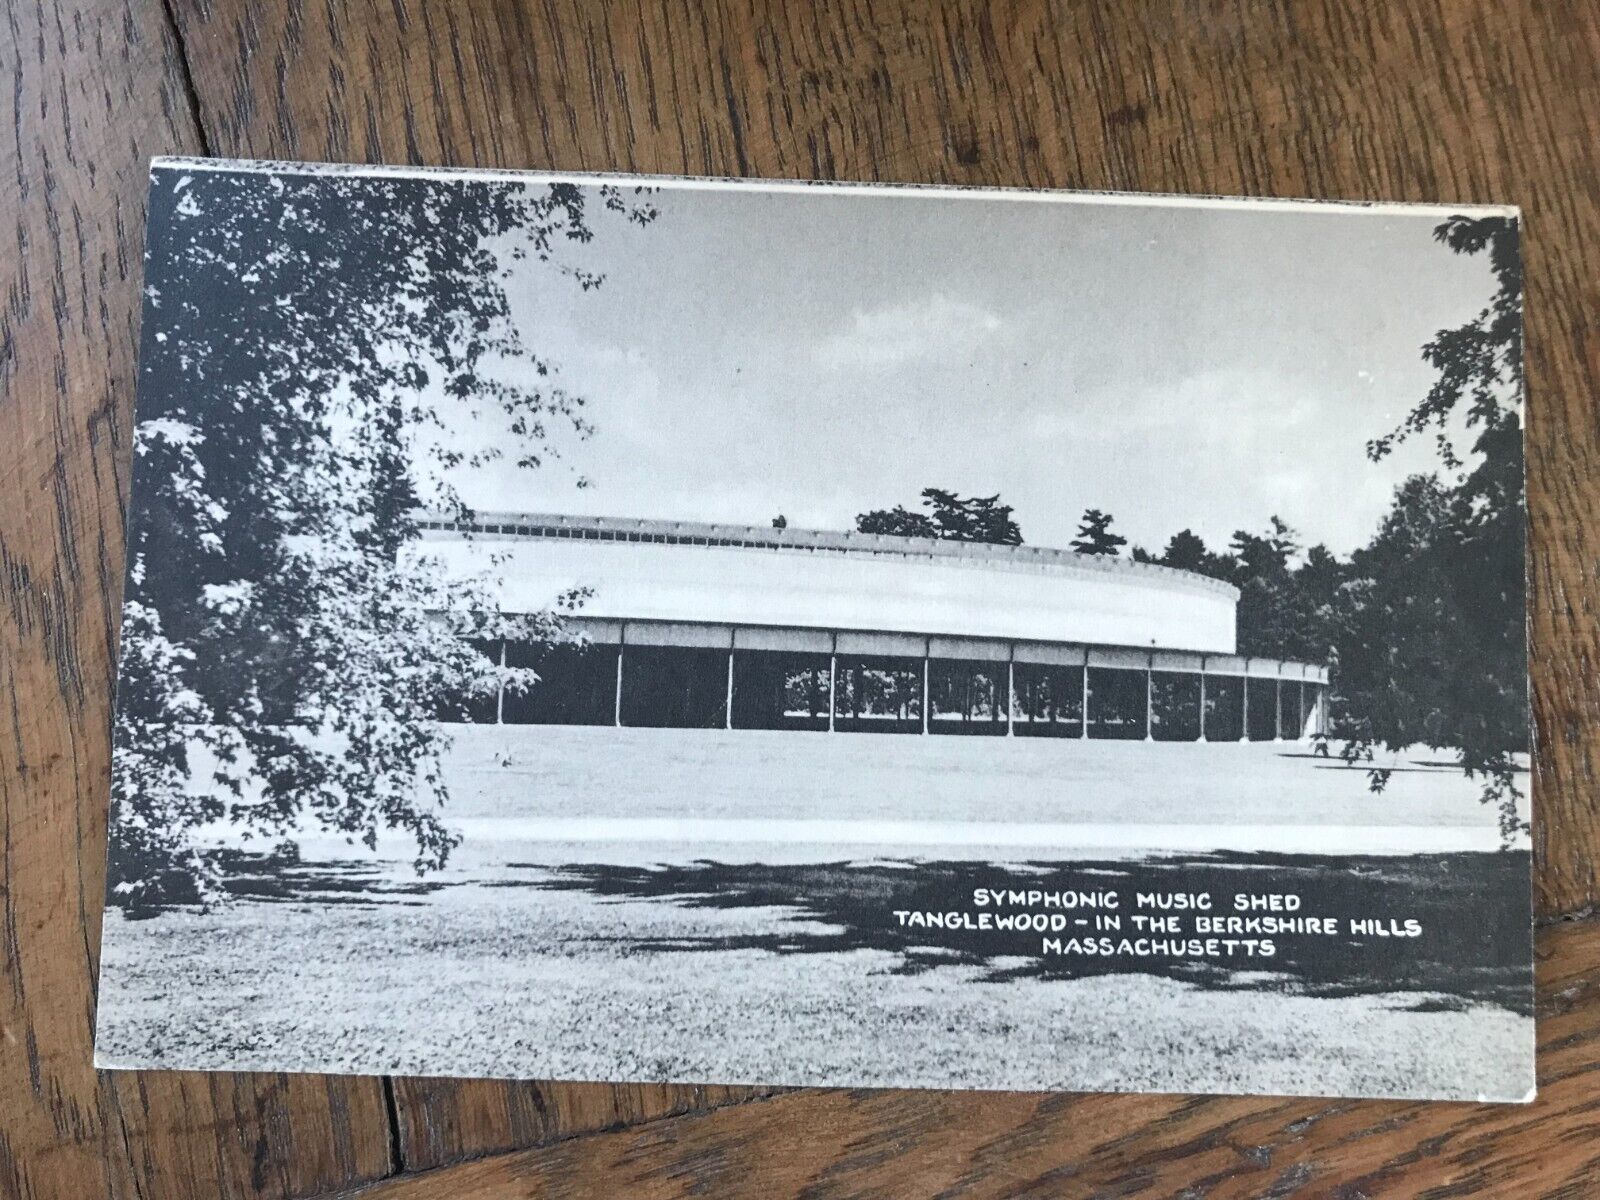 Symphonic Music Shed Tanglewood in the Berkshire Hills Massachusetts Postcard